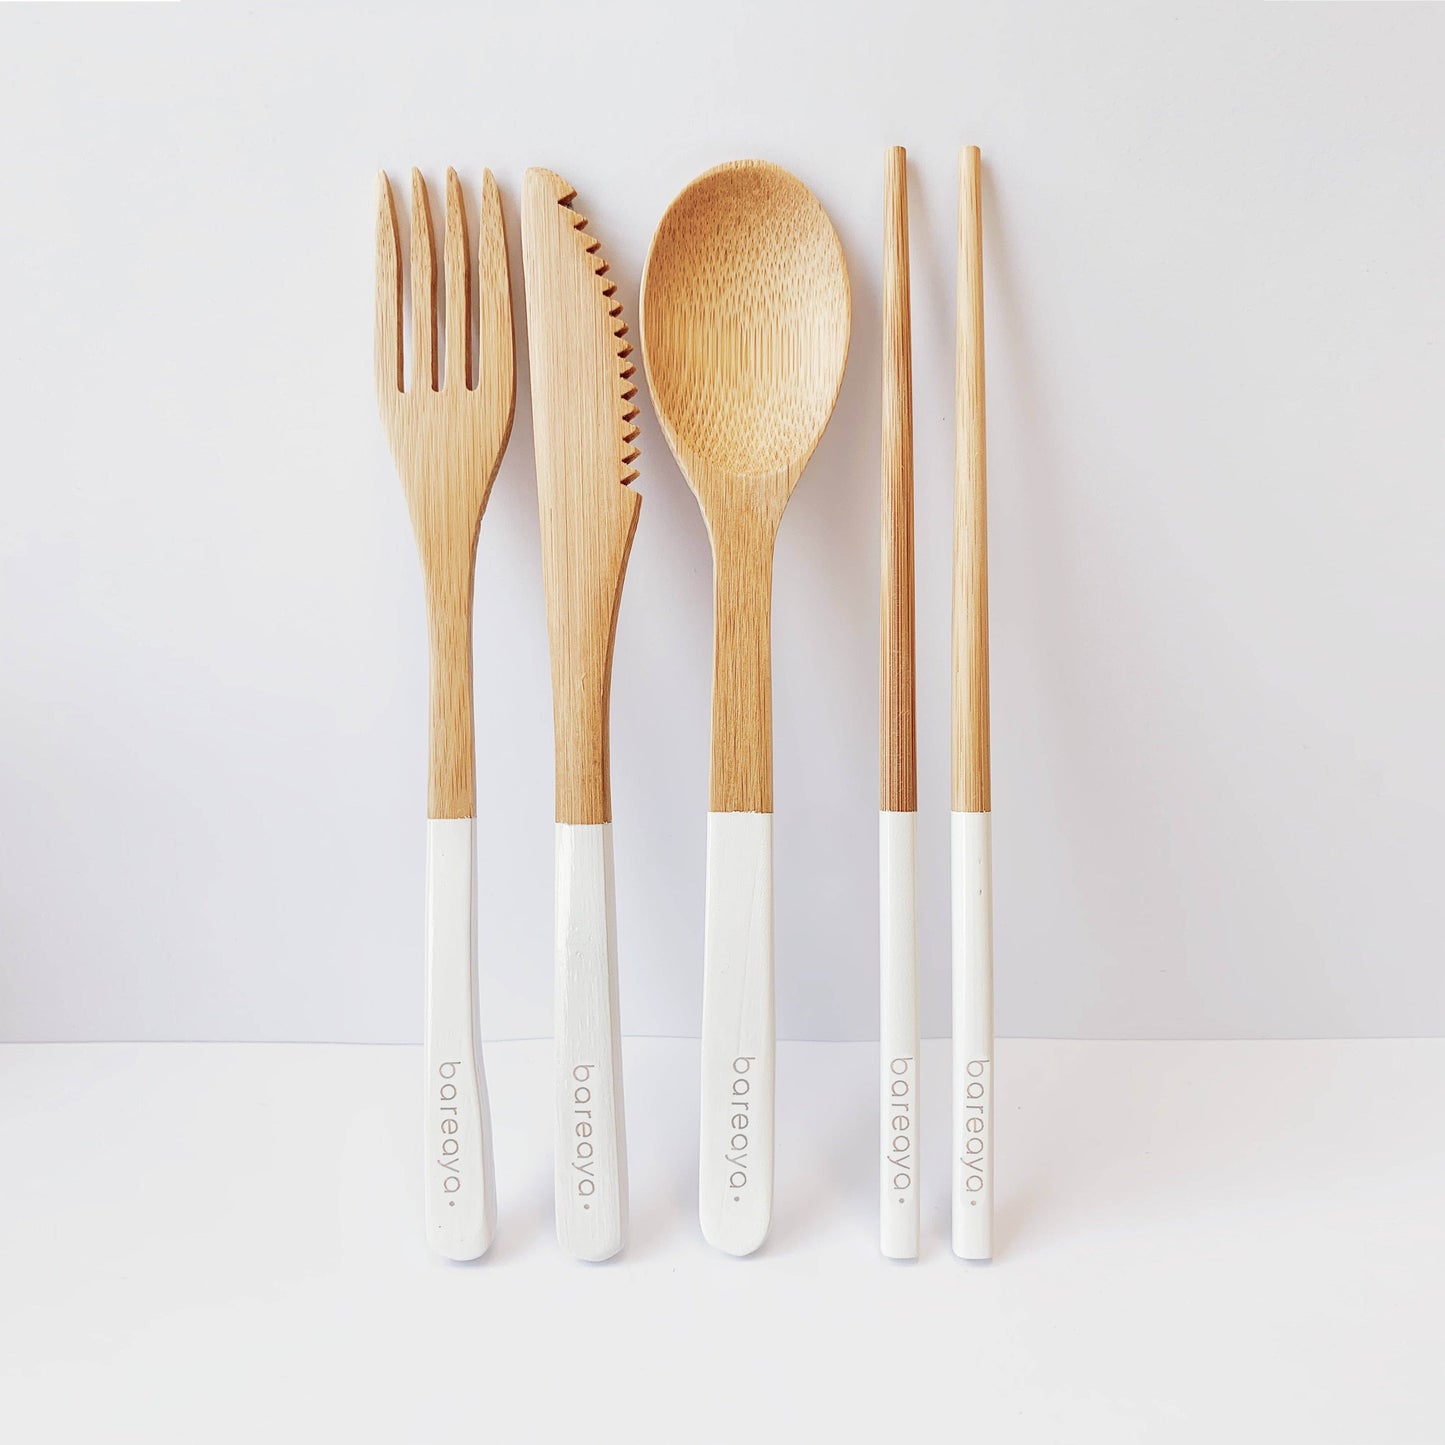 Bamboo reusable cutlery set includes fork, knife, spoon and set of chopsticks 